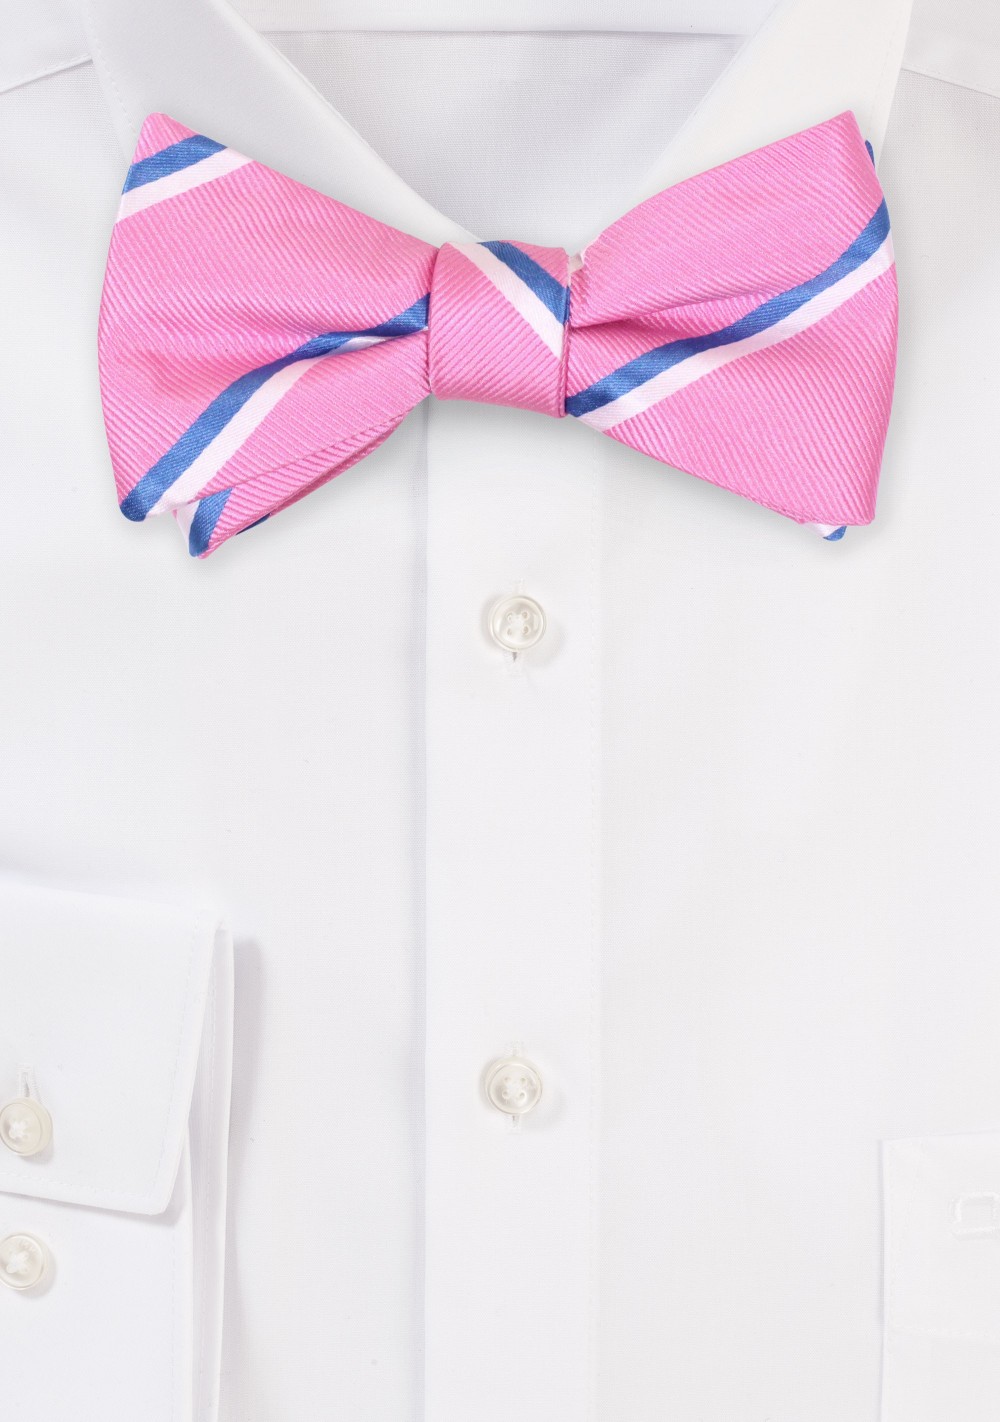 Pink, Blue, White Striped Bow Tie